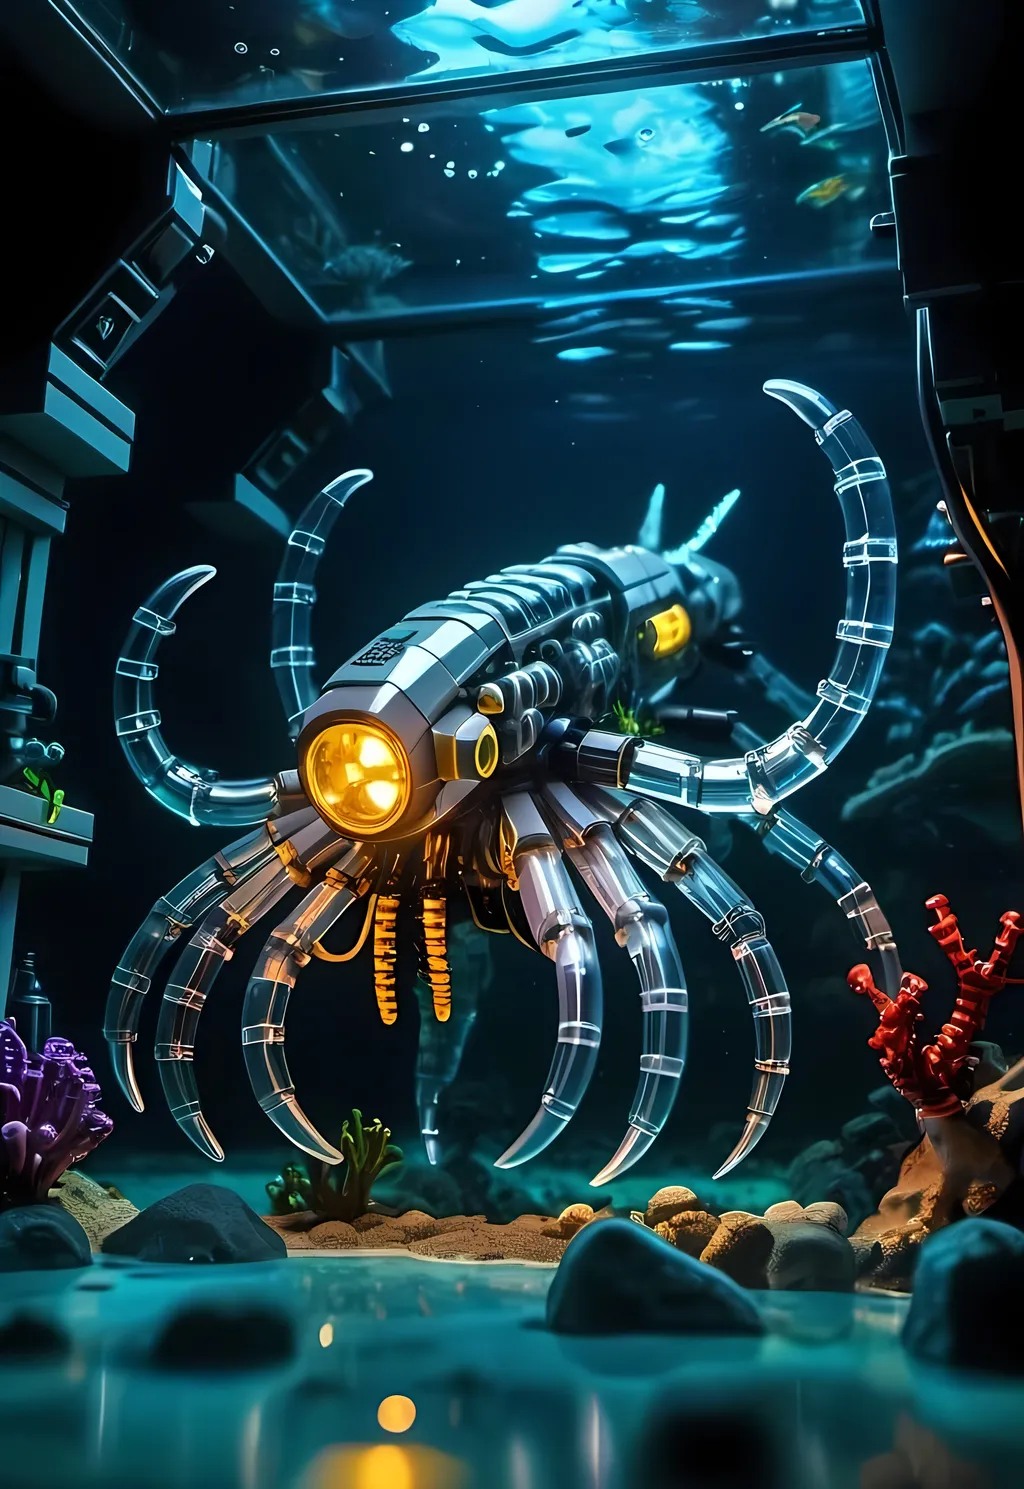 Prompt: Big scale Cyberpunk transparent scorpion shape Lego submarine with  light in Atlantis exploring lost city and some lego divers, deep ocean, bionic, dark gray, realistic underwater, detailed Lego construction, futuristic, high-tech, deep-sea exploration,underwater scene, marine life, deep-sea exploration, cool tones,4k, neon lights, intense and ominous atmosphere, high quality, detailed, Lego building, cyberpunk, deep ocean, bionic design, futuristic kraken, underwater scene, atmospheric lighting